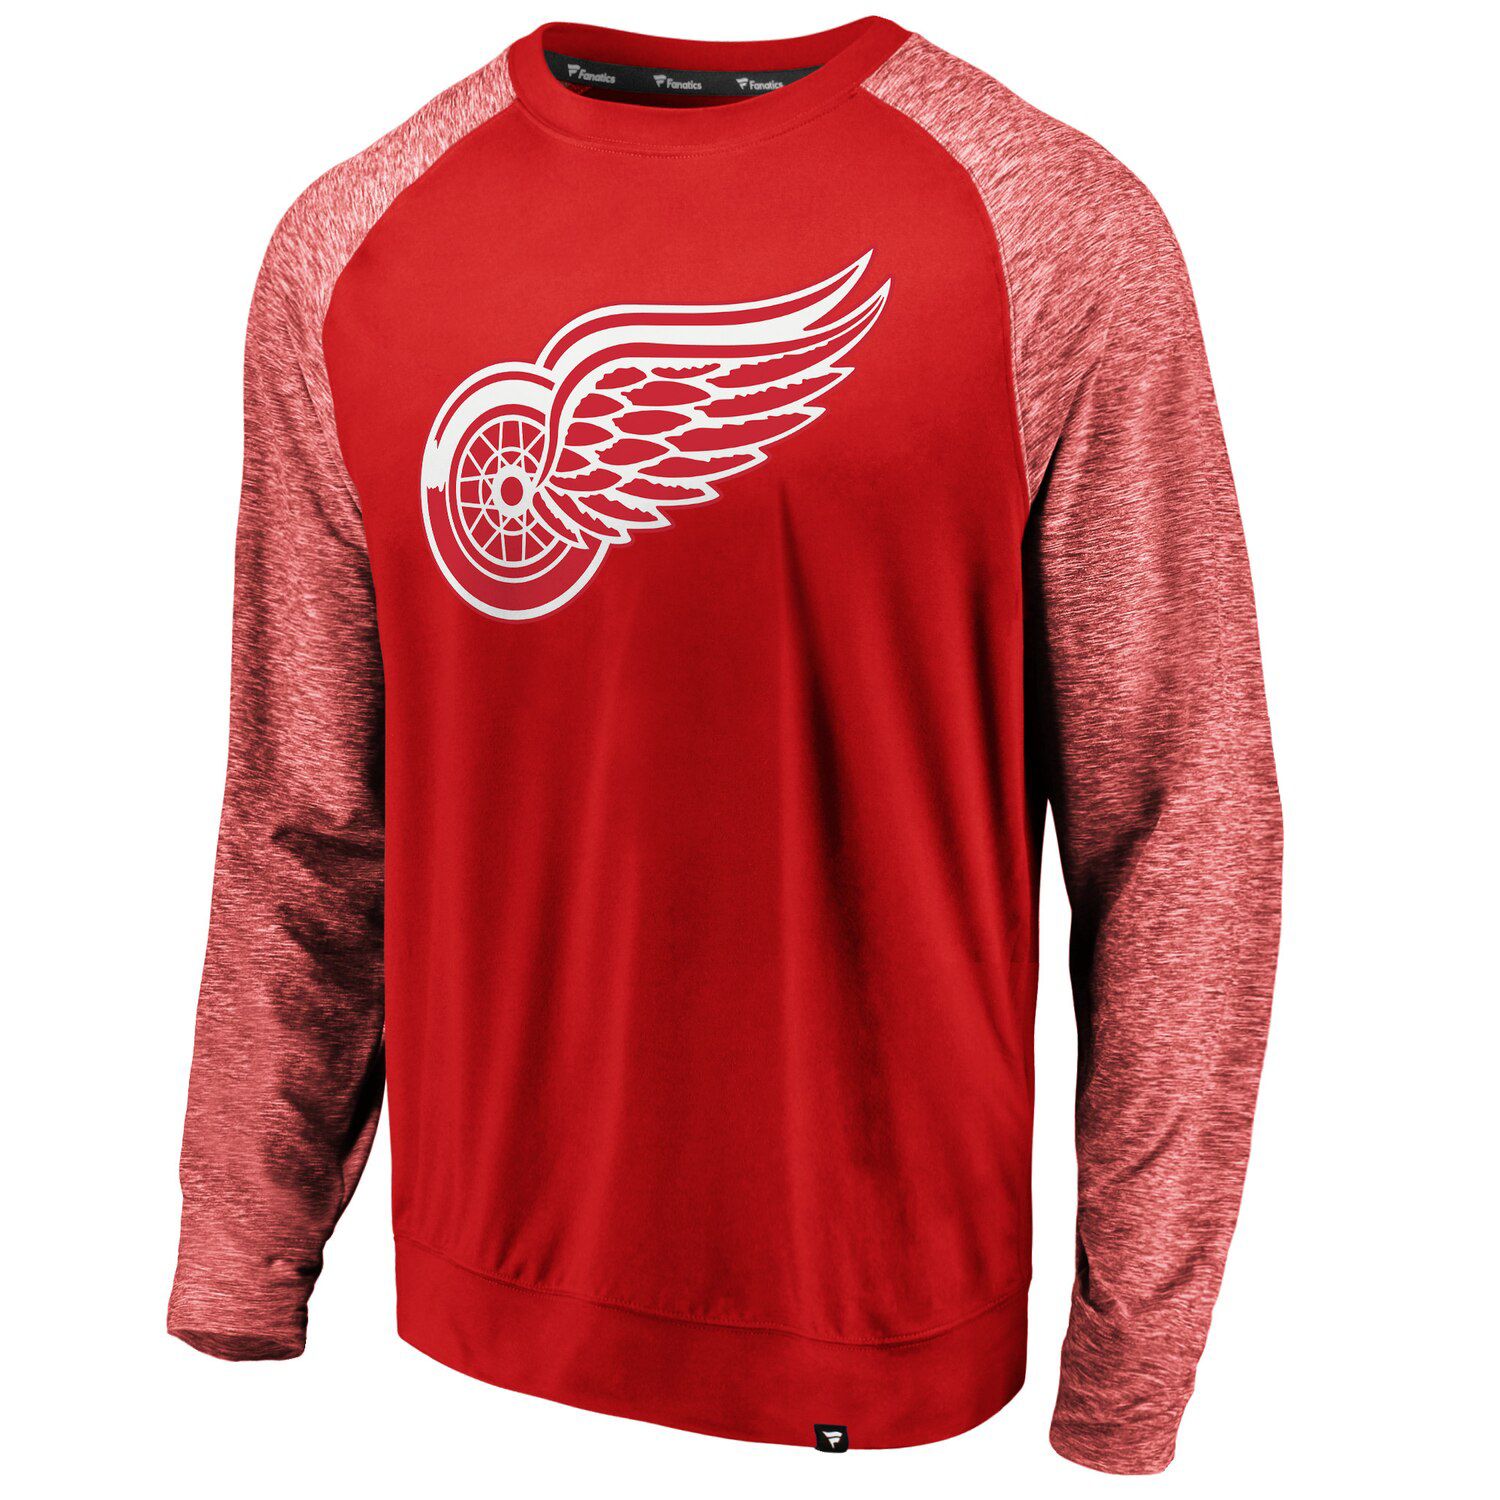 red wings t shirt